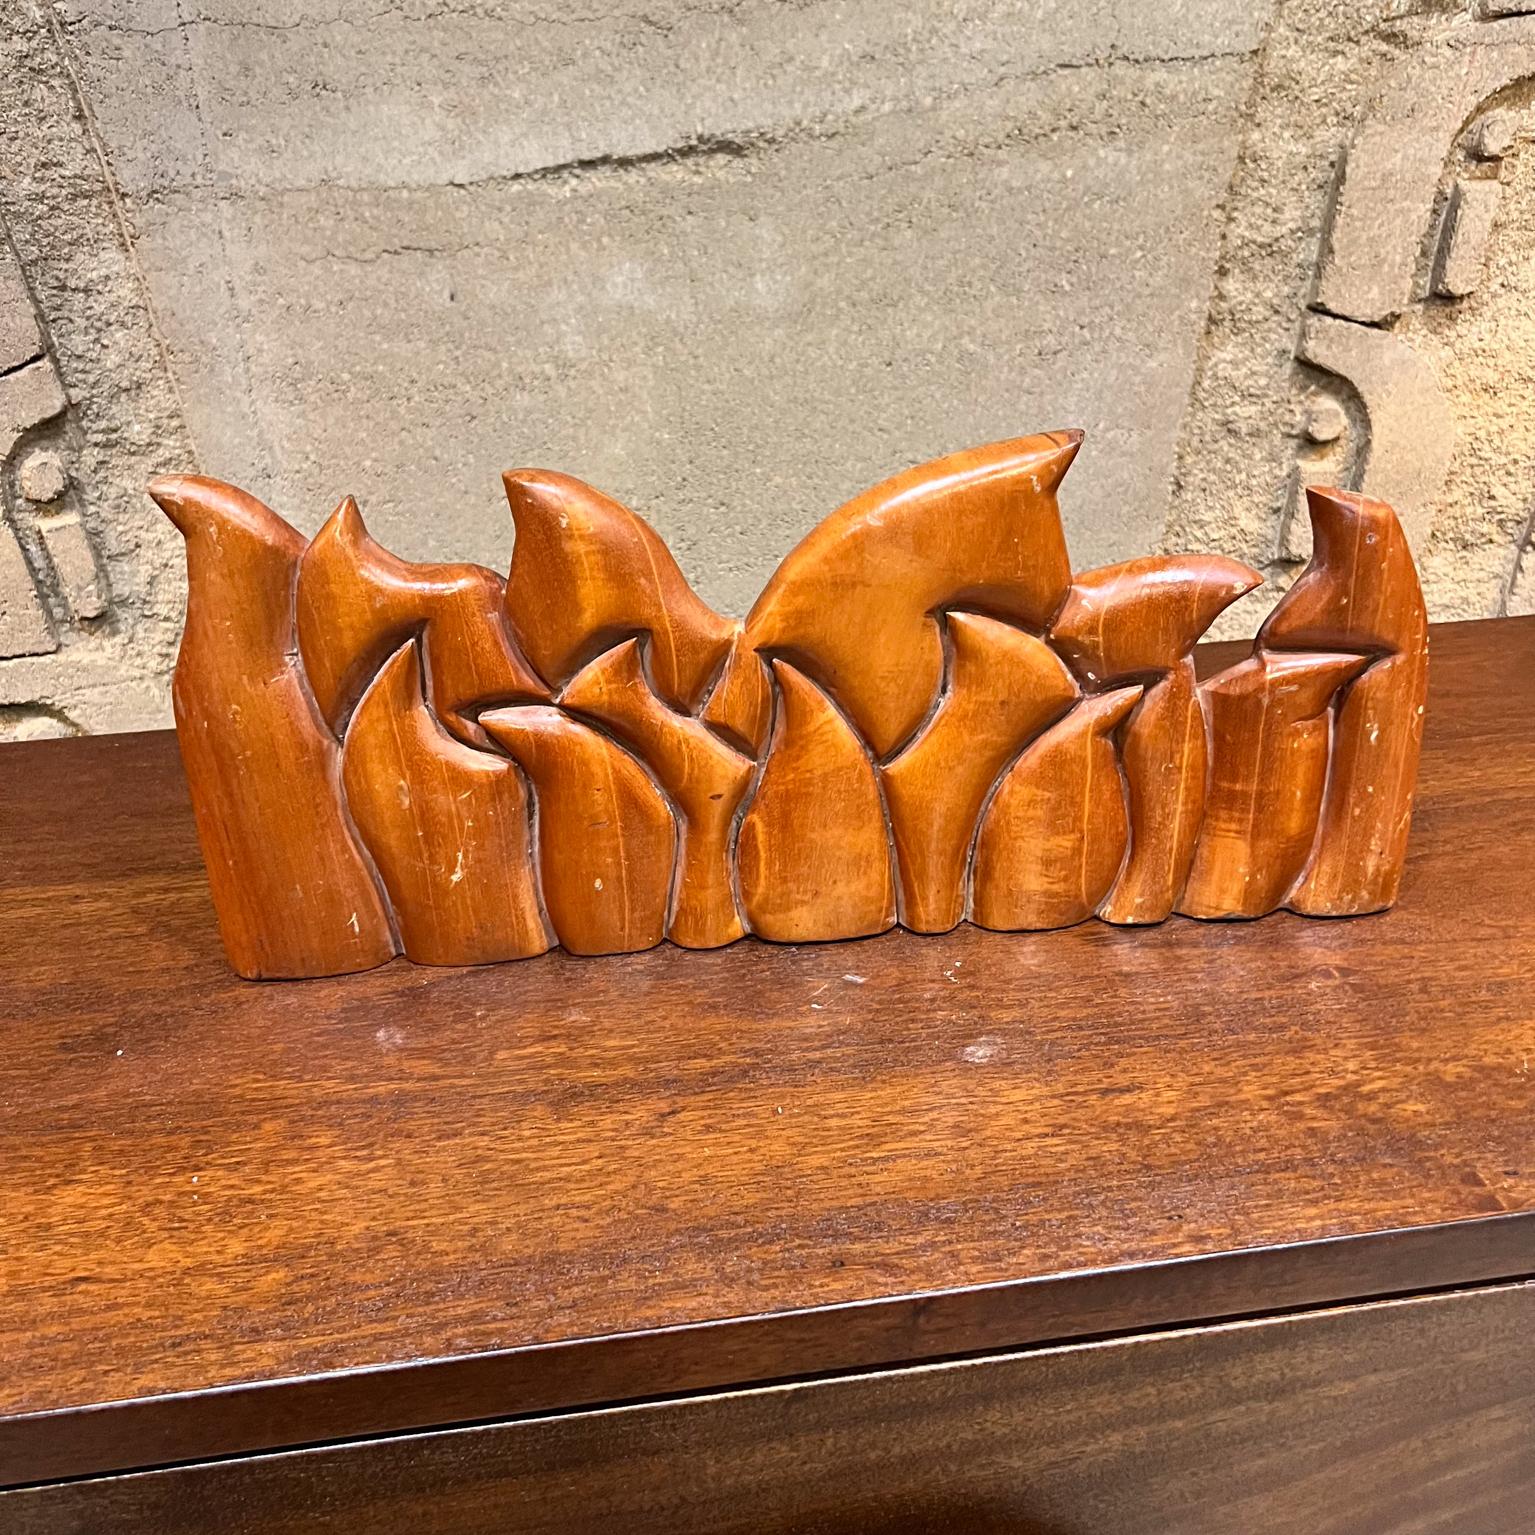 1999 Victor Rozo Last Supper Abstract Wood Sculpture Mexico DF For Sale 2